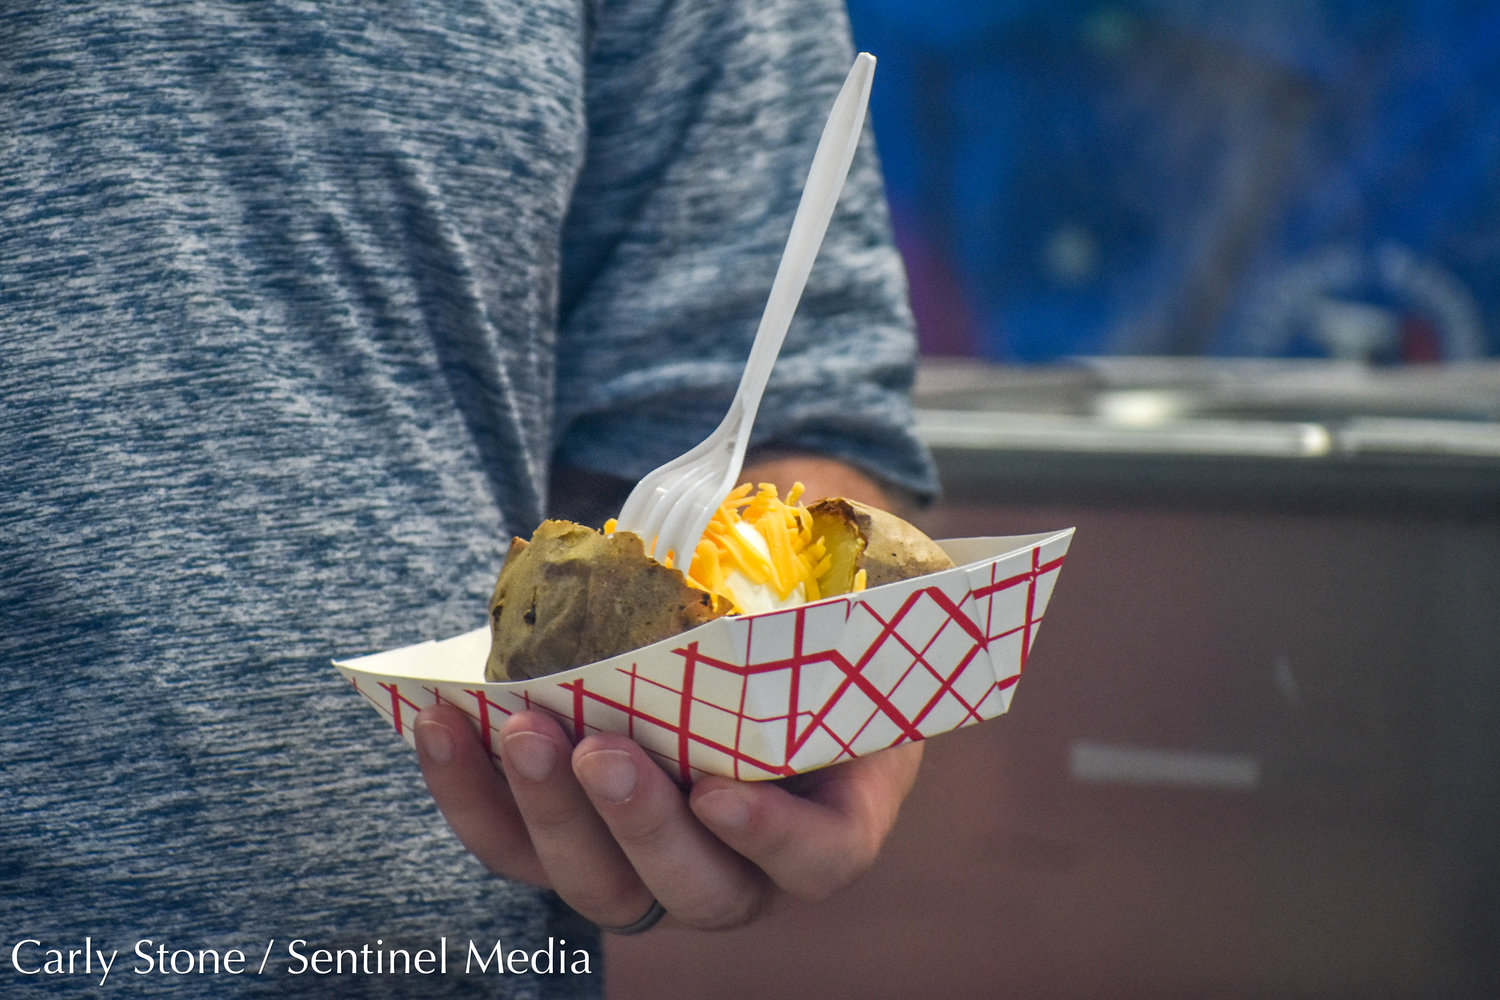 The NYS Fair's famous $1 baked potato is back again this year.